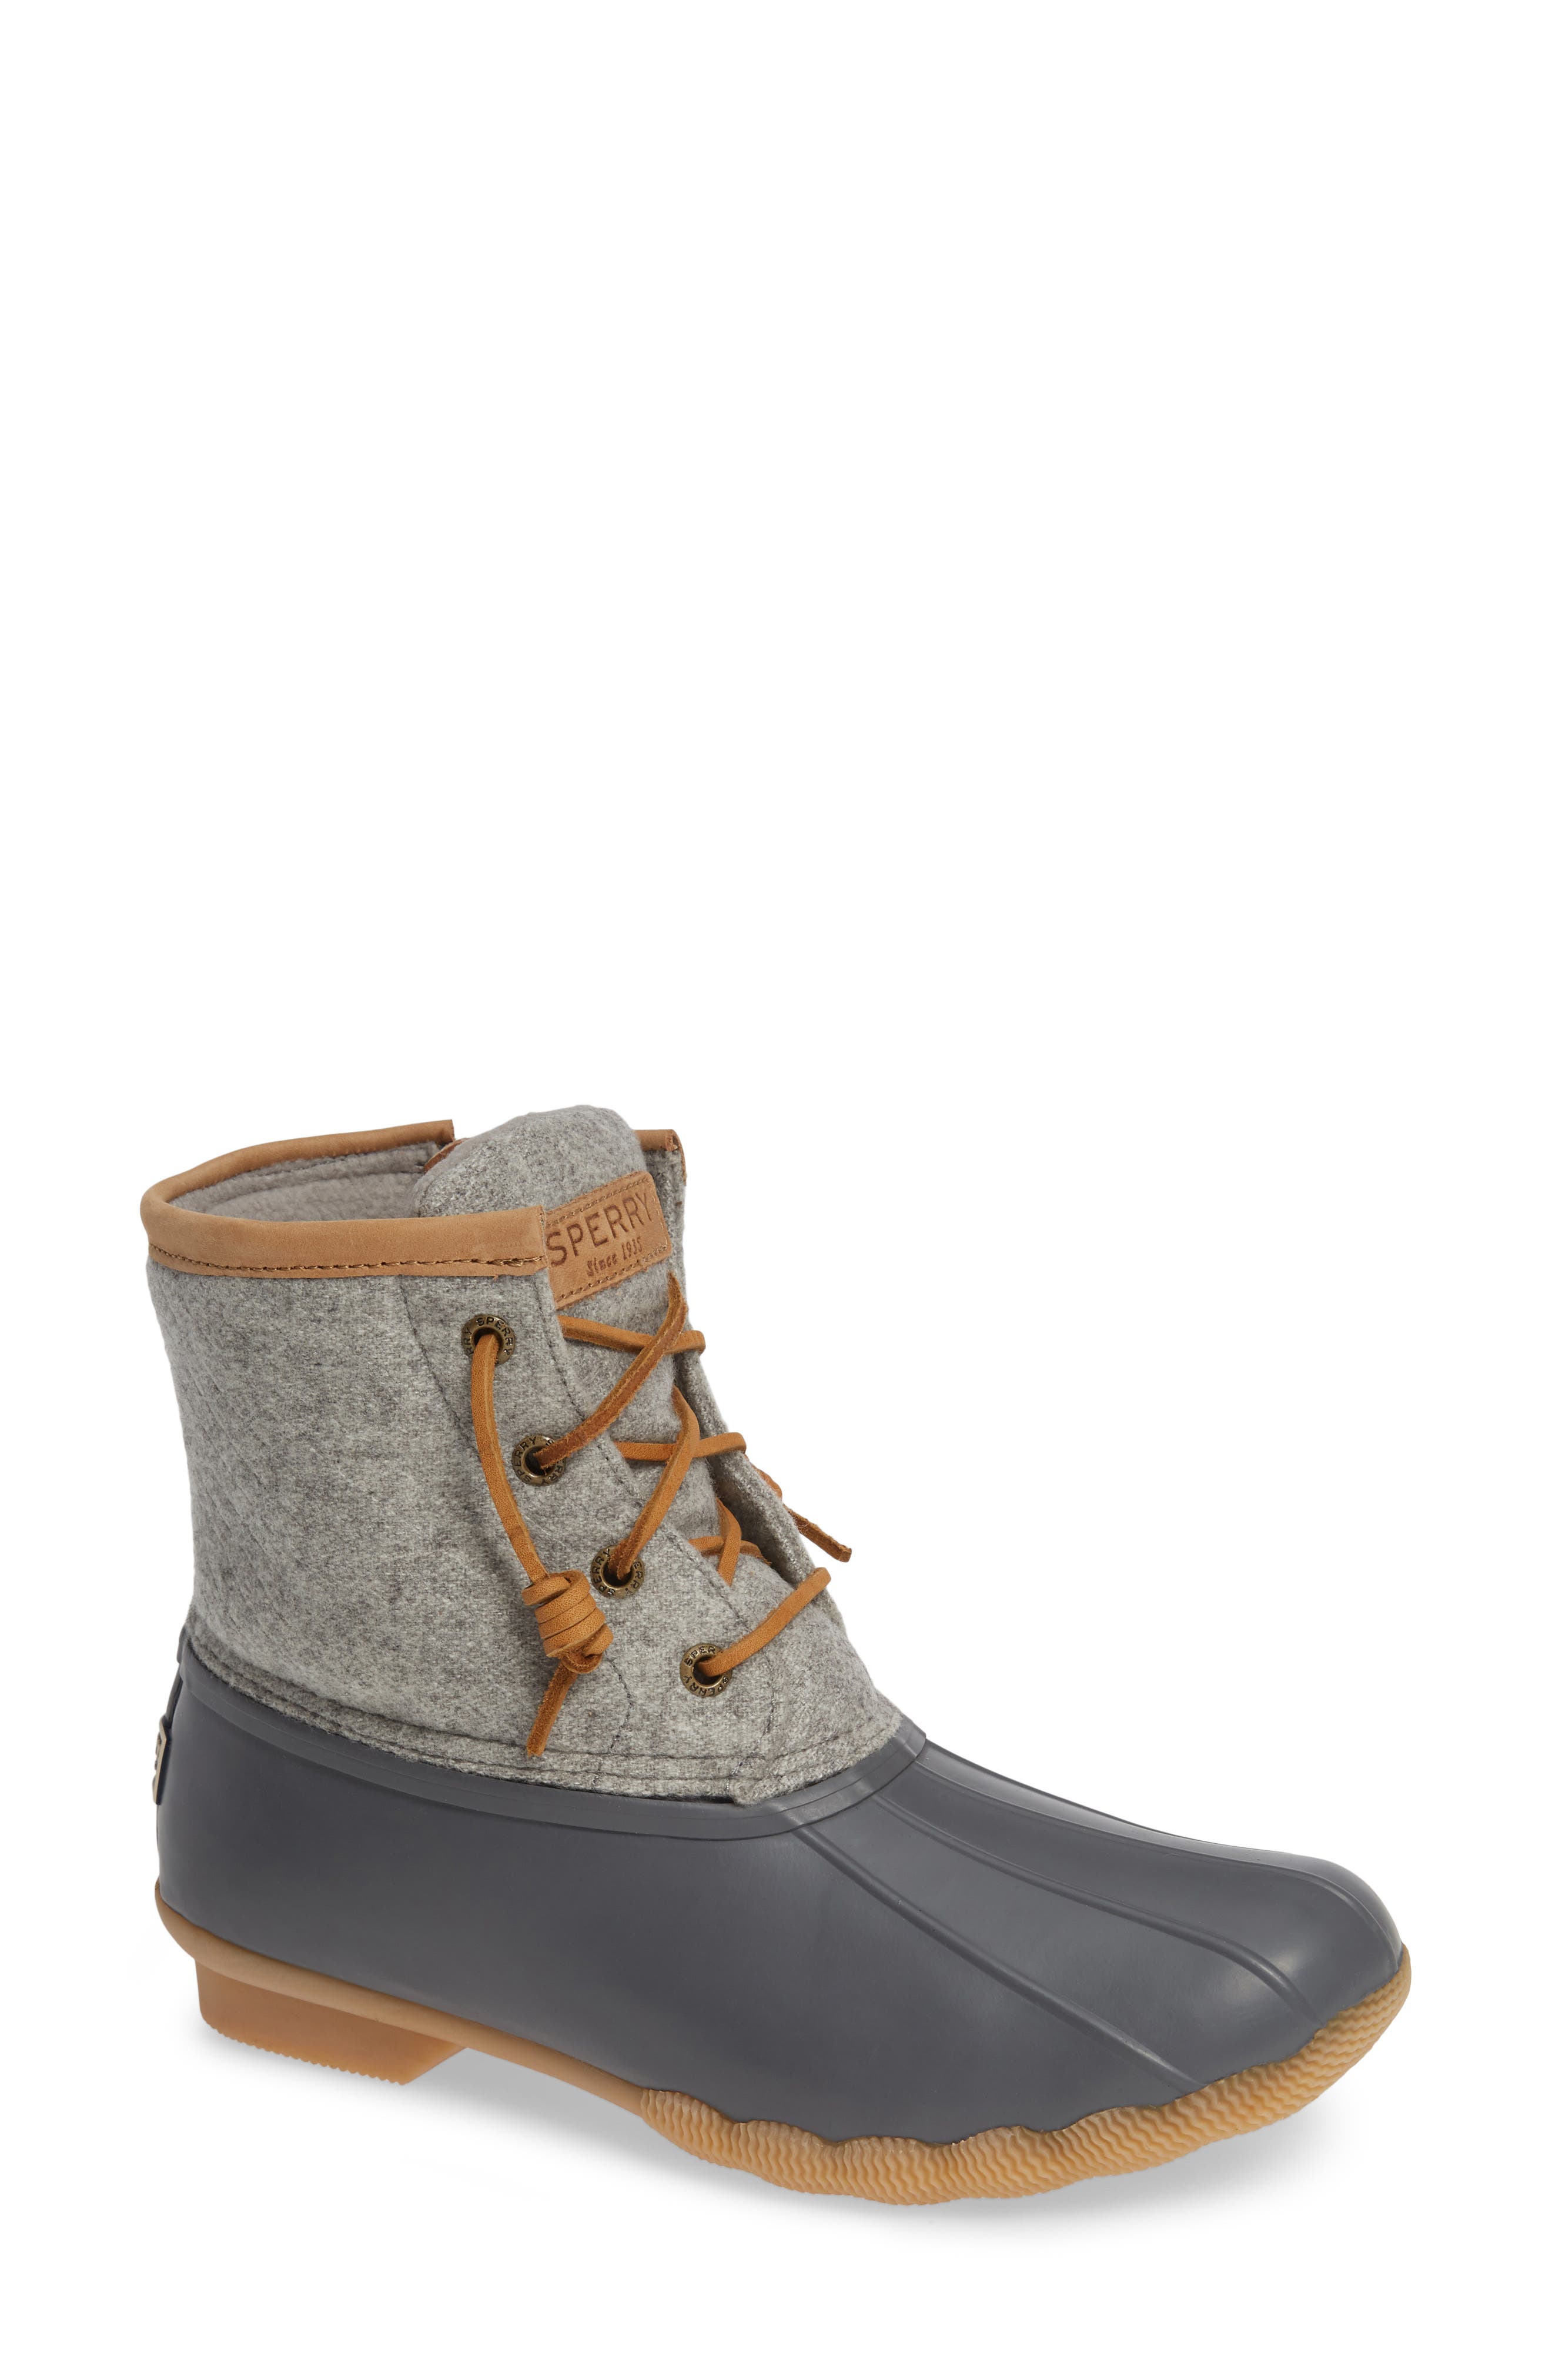 grey quilted sperry duck boots